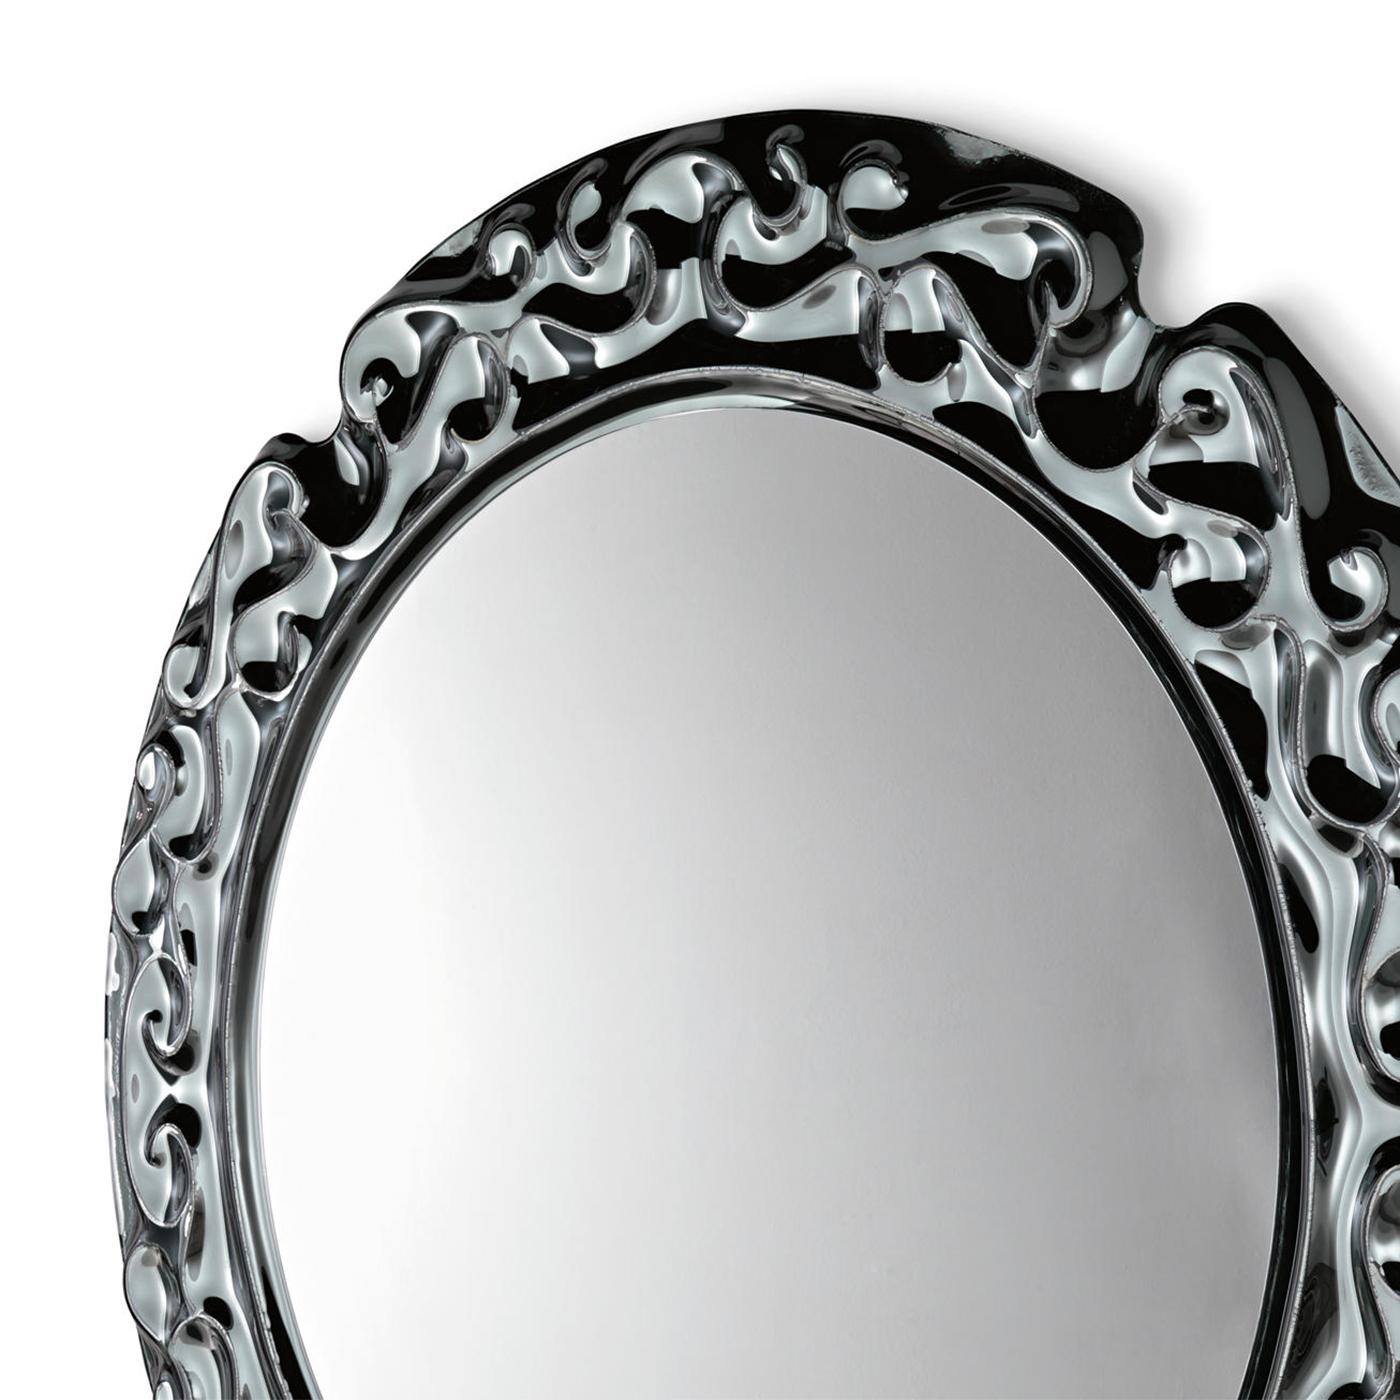 Mirror black Manor round with frame in fused glass
in black silvered finish with deco reliefs. 6mm thickness.
With flat round glass mirror, 5mm thickness in neutral finish.
Frame's back made of painted metal.
Also available in smocked finish or